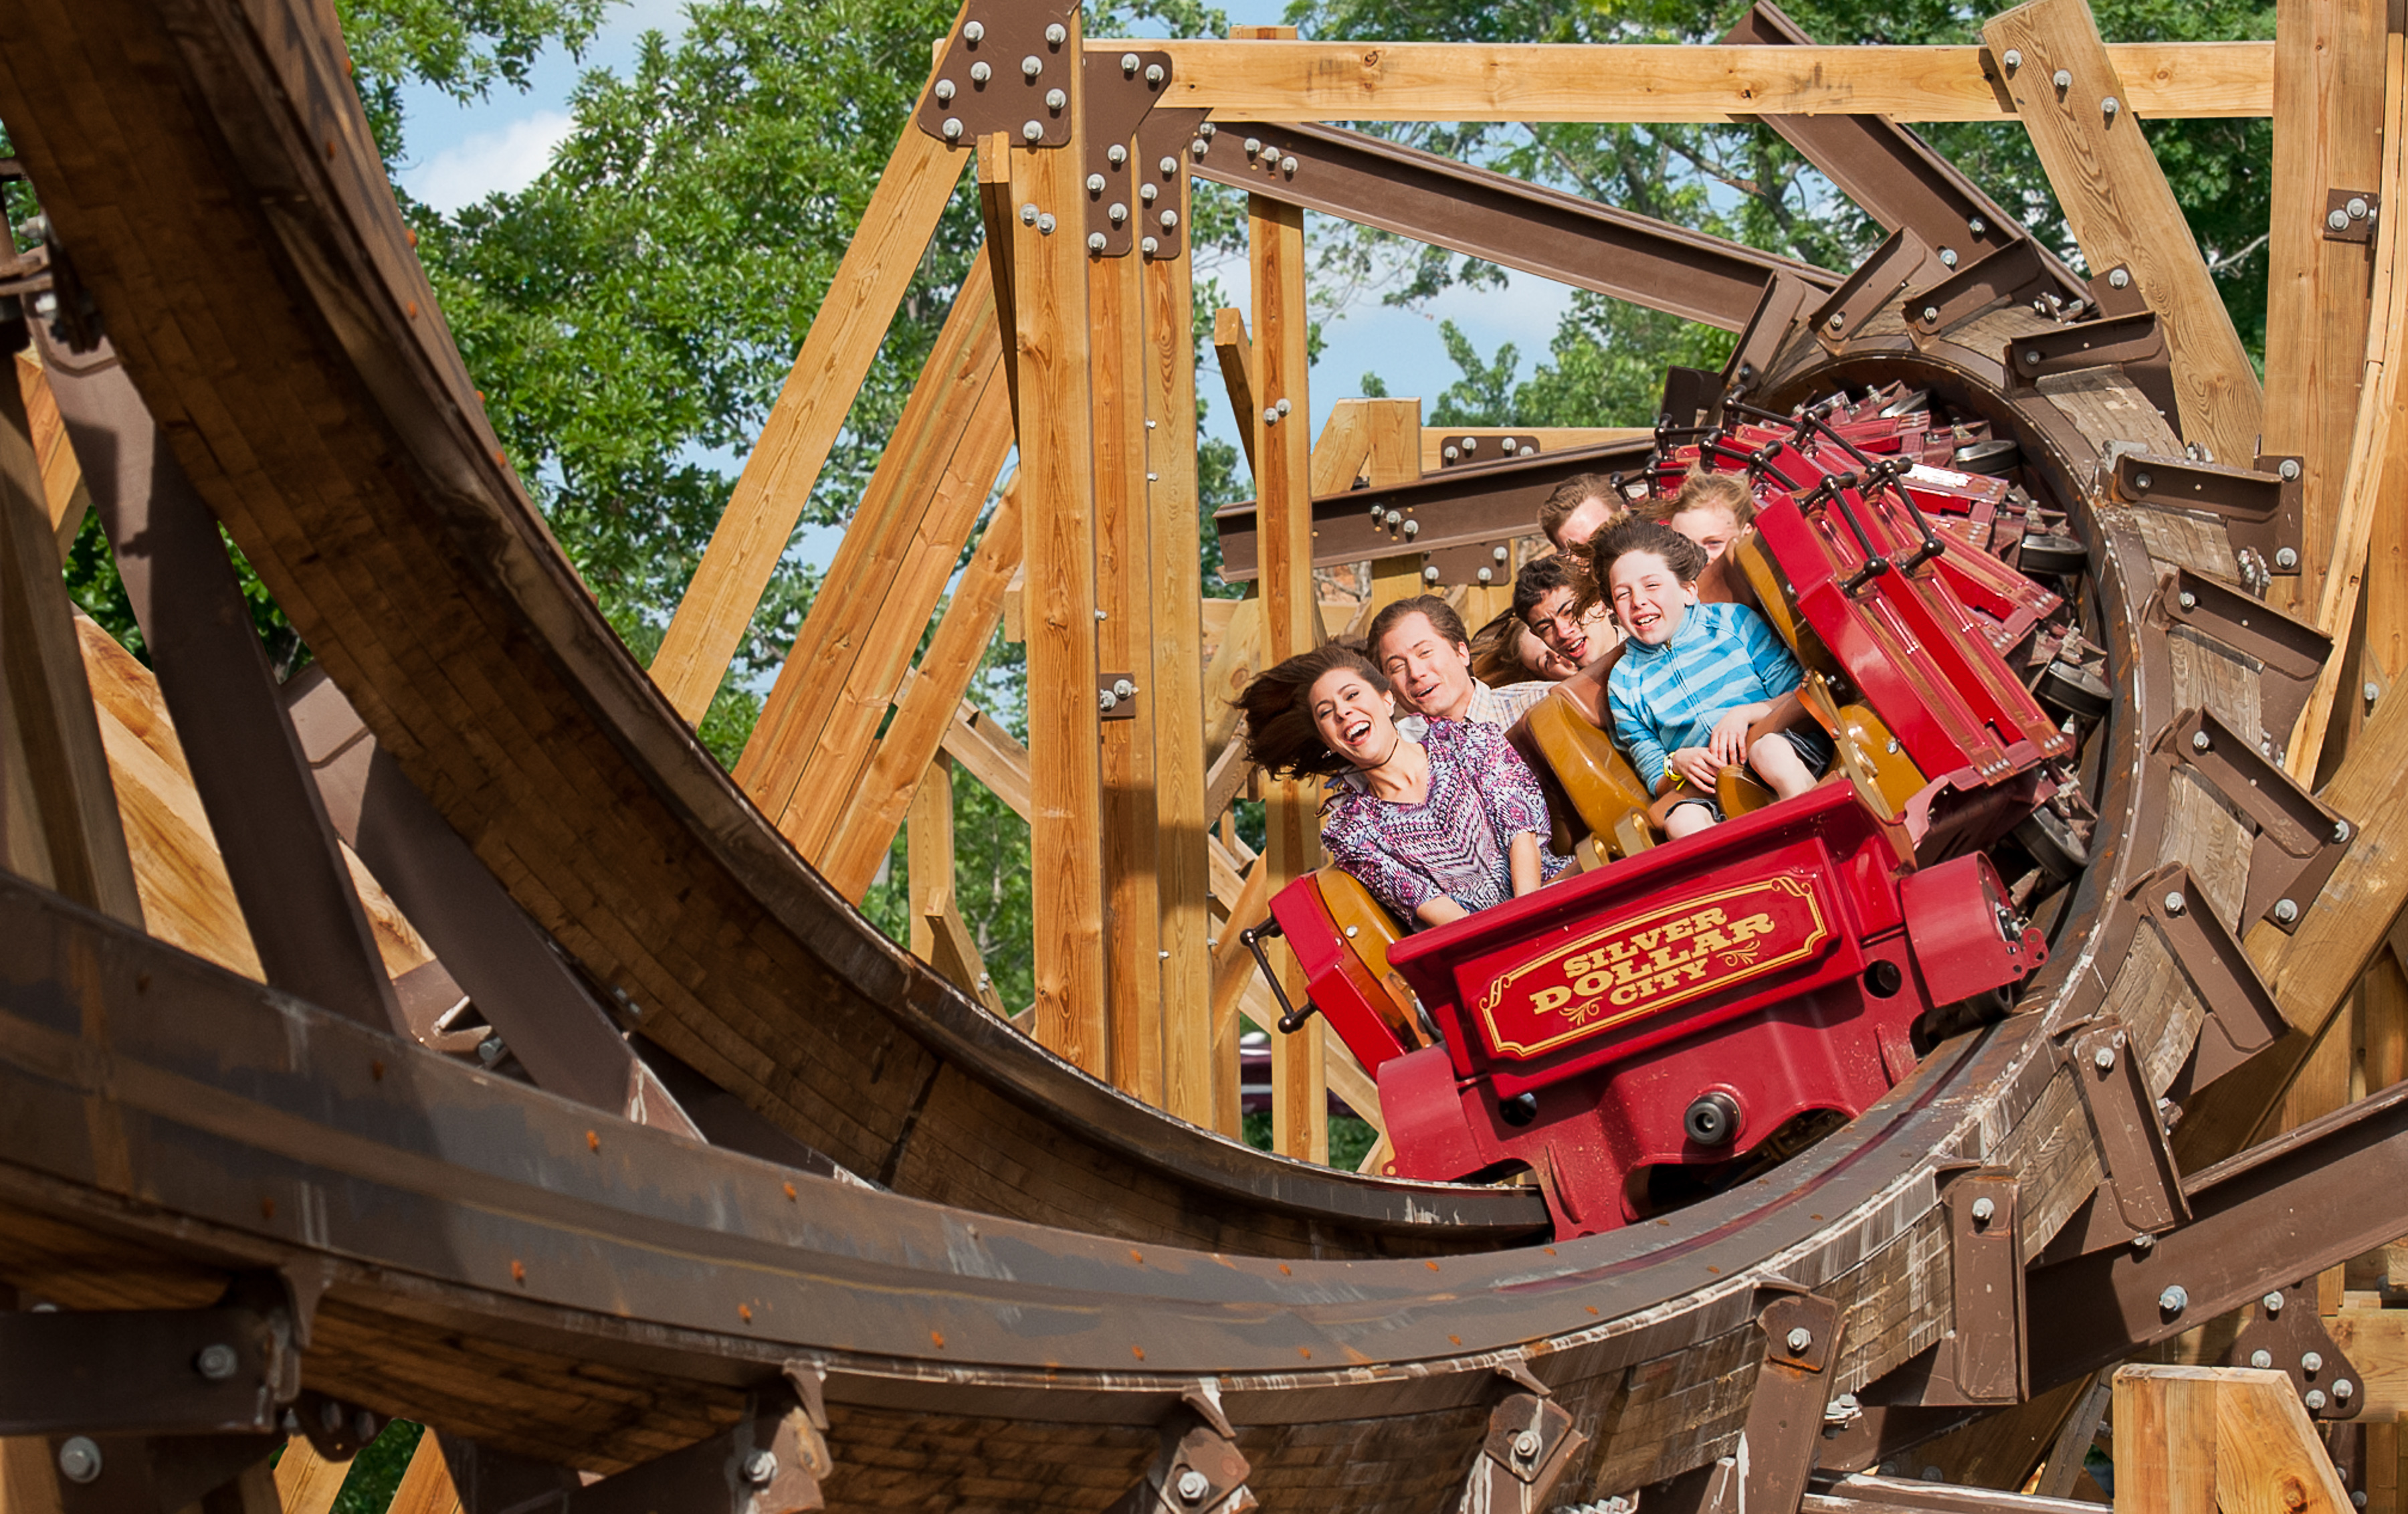 Outlaw Run is the world's first and only wood coaster with a double barrel roll.